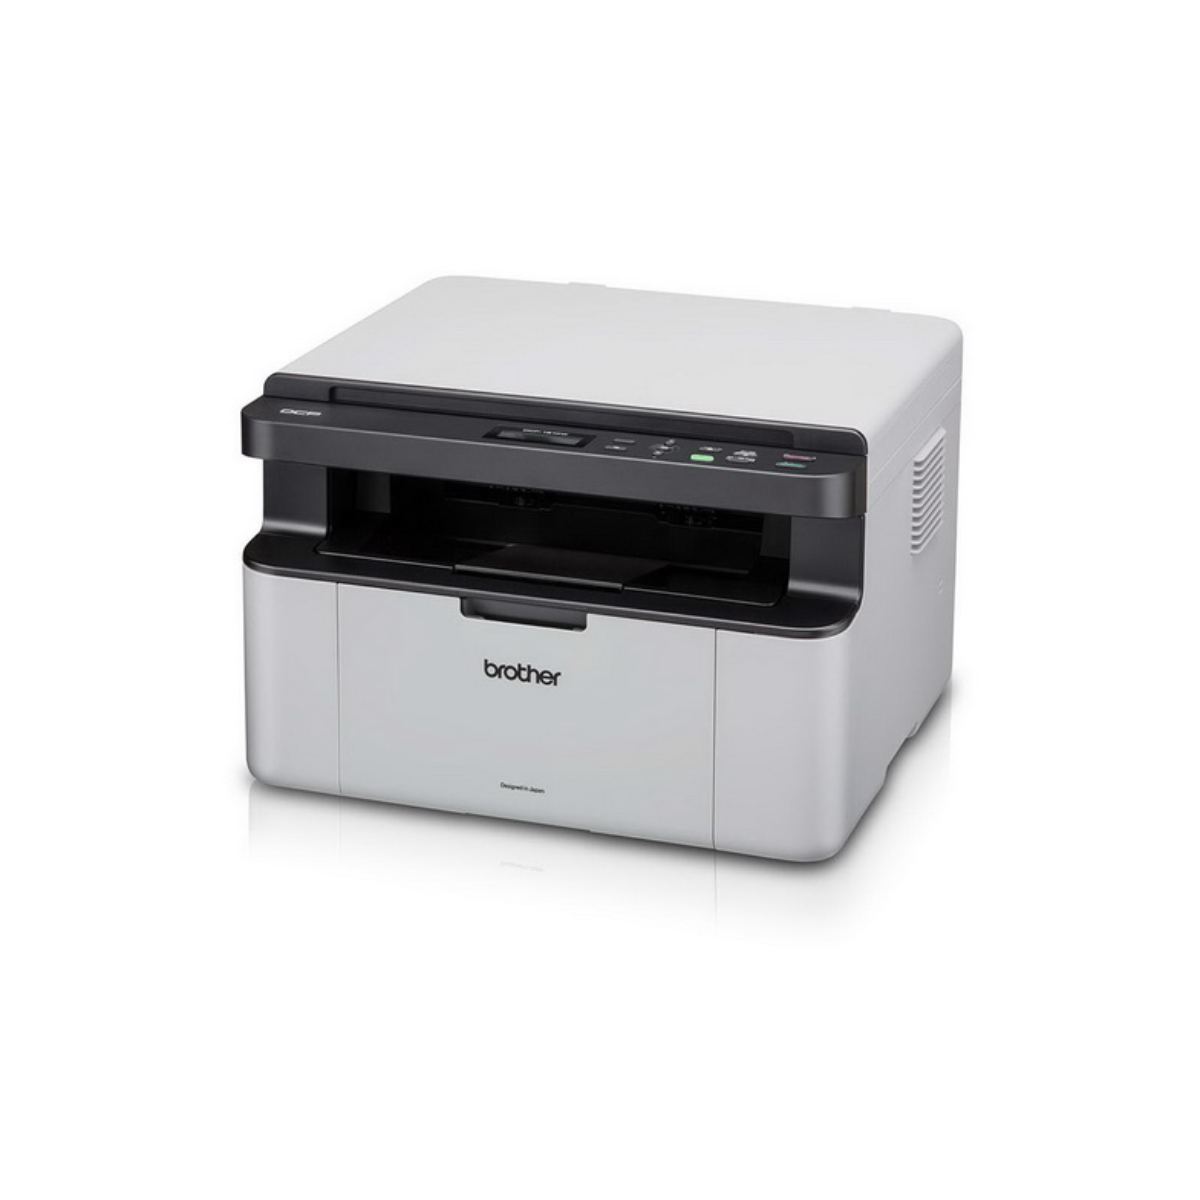 Brother All-in-one Printer DCP-1610W